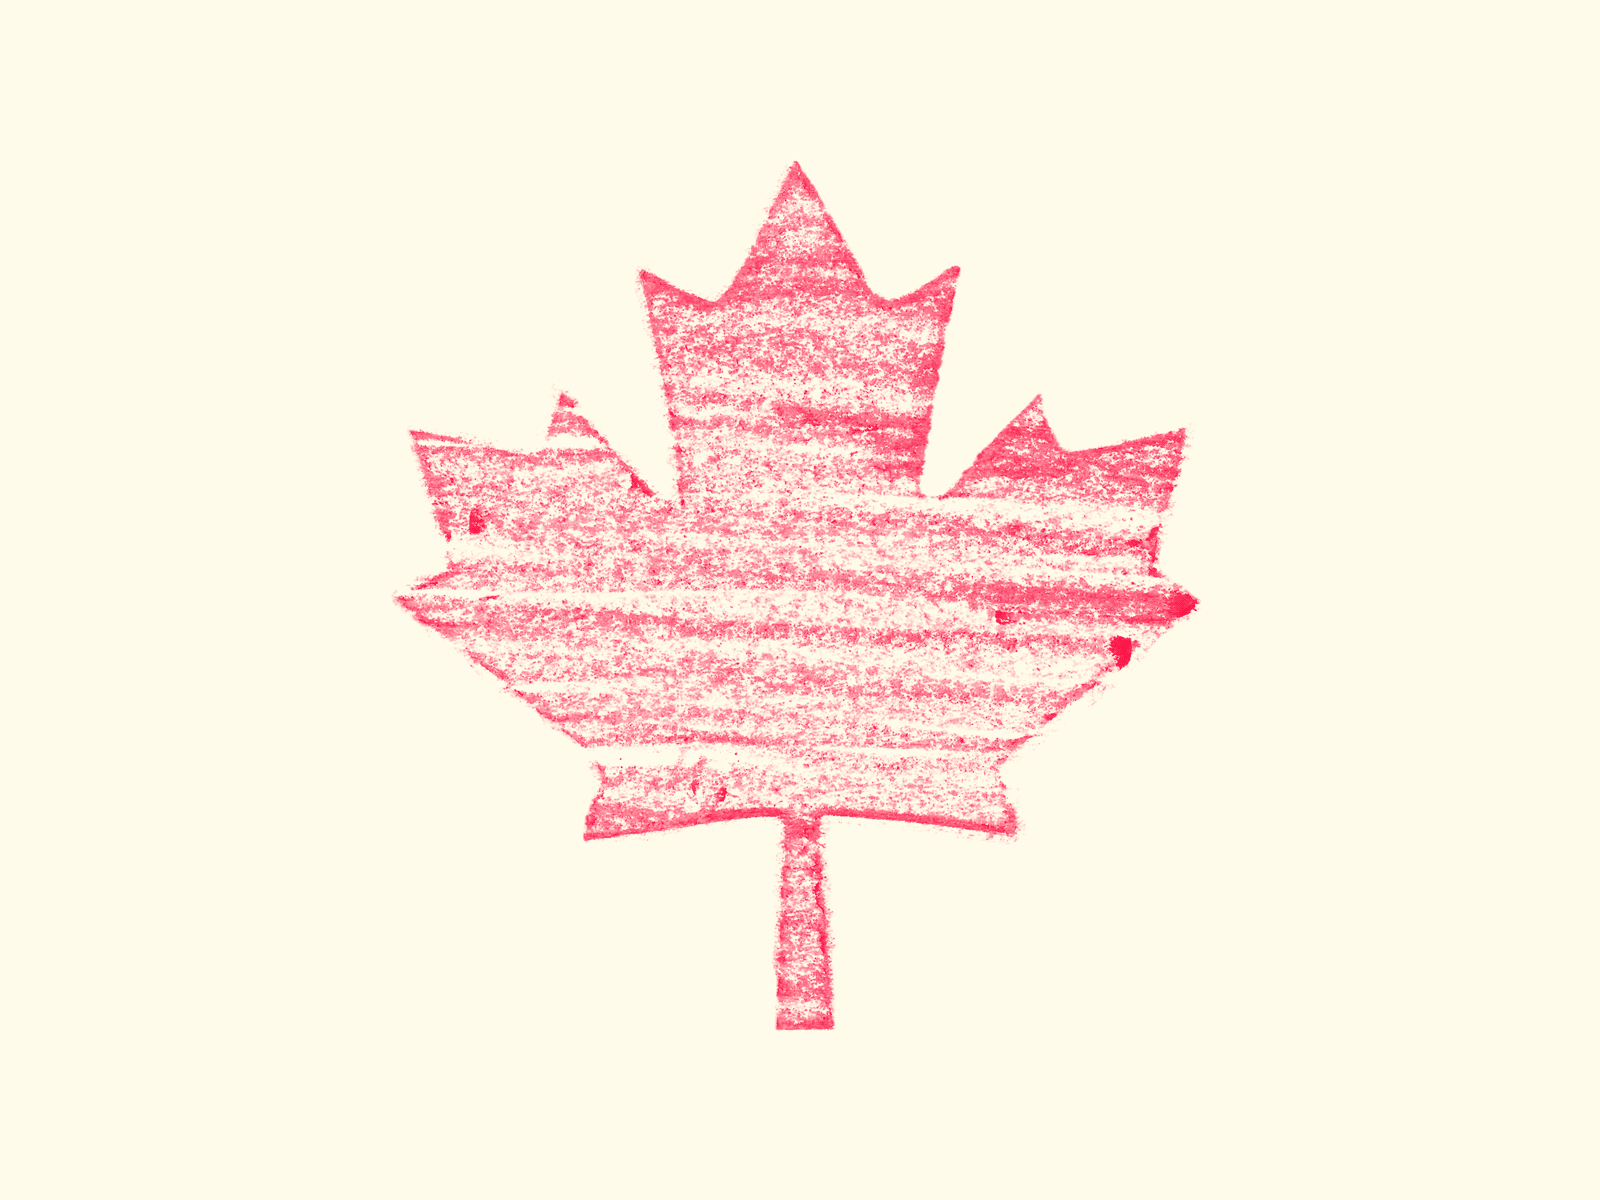 Oh Canada! - Textured animated GIF